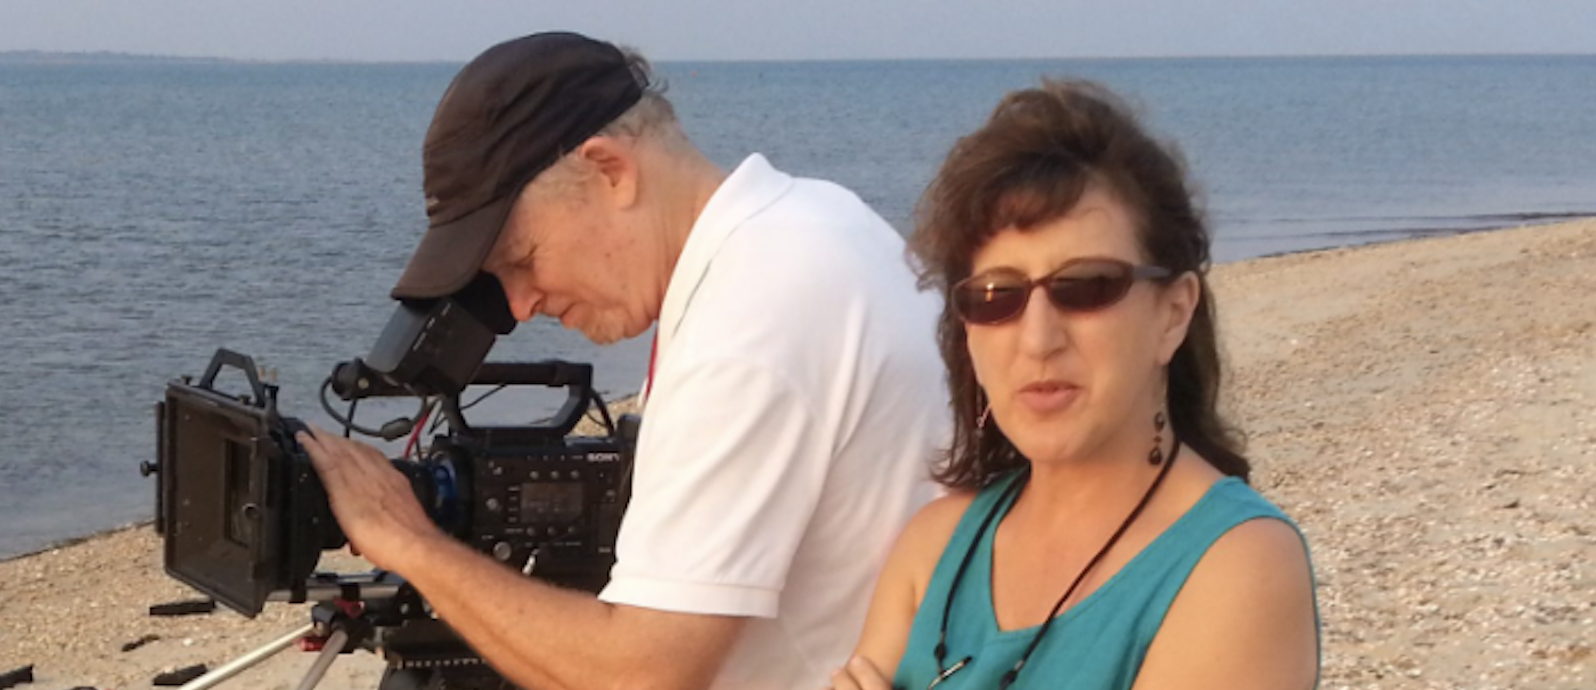 color photograph of filmmaker Andrea Torrice standing on a beach in blue sleeveless top and sunglasses with arms crossed looking at the viewer with cameraman in white t shirt behind looking into large black camera on tripod with ocean to the left